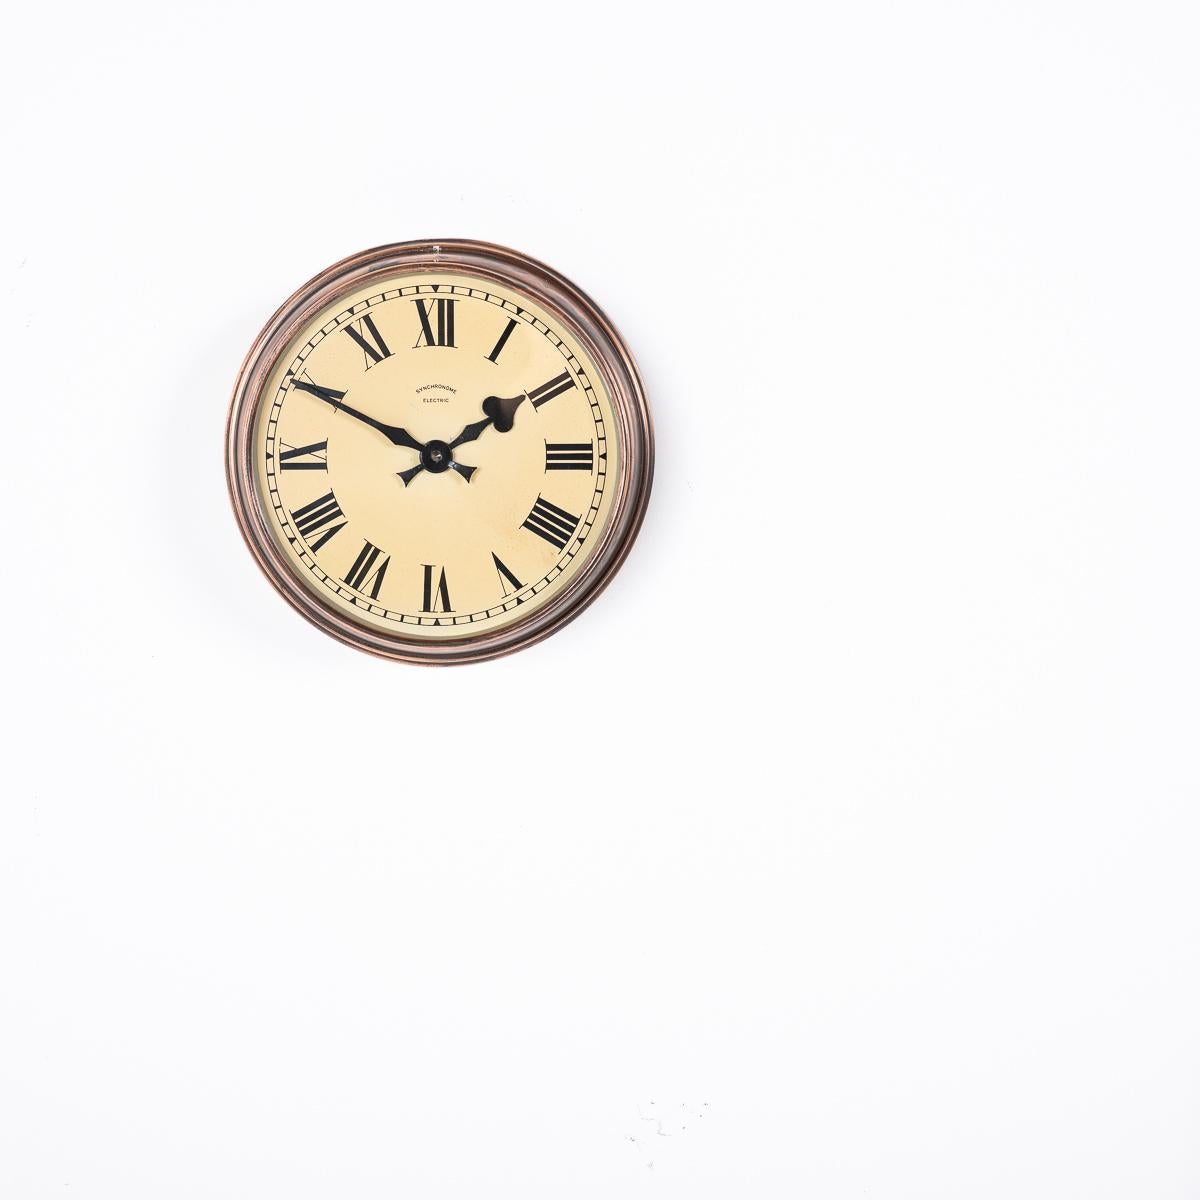 British Small Antique Industrial Copper Wall Clock by Synchronome